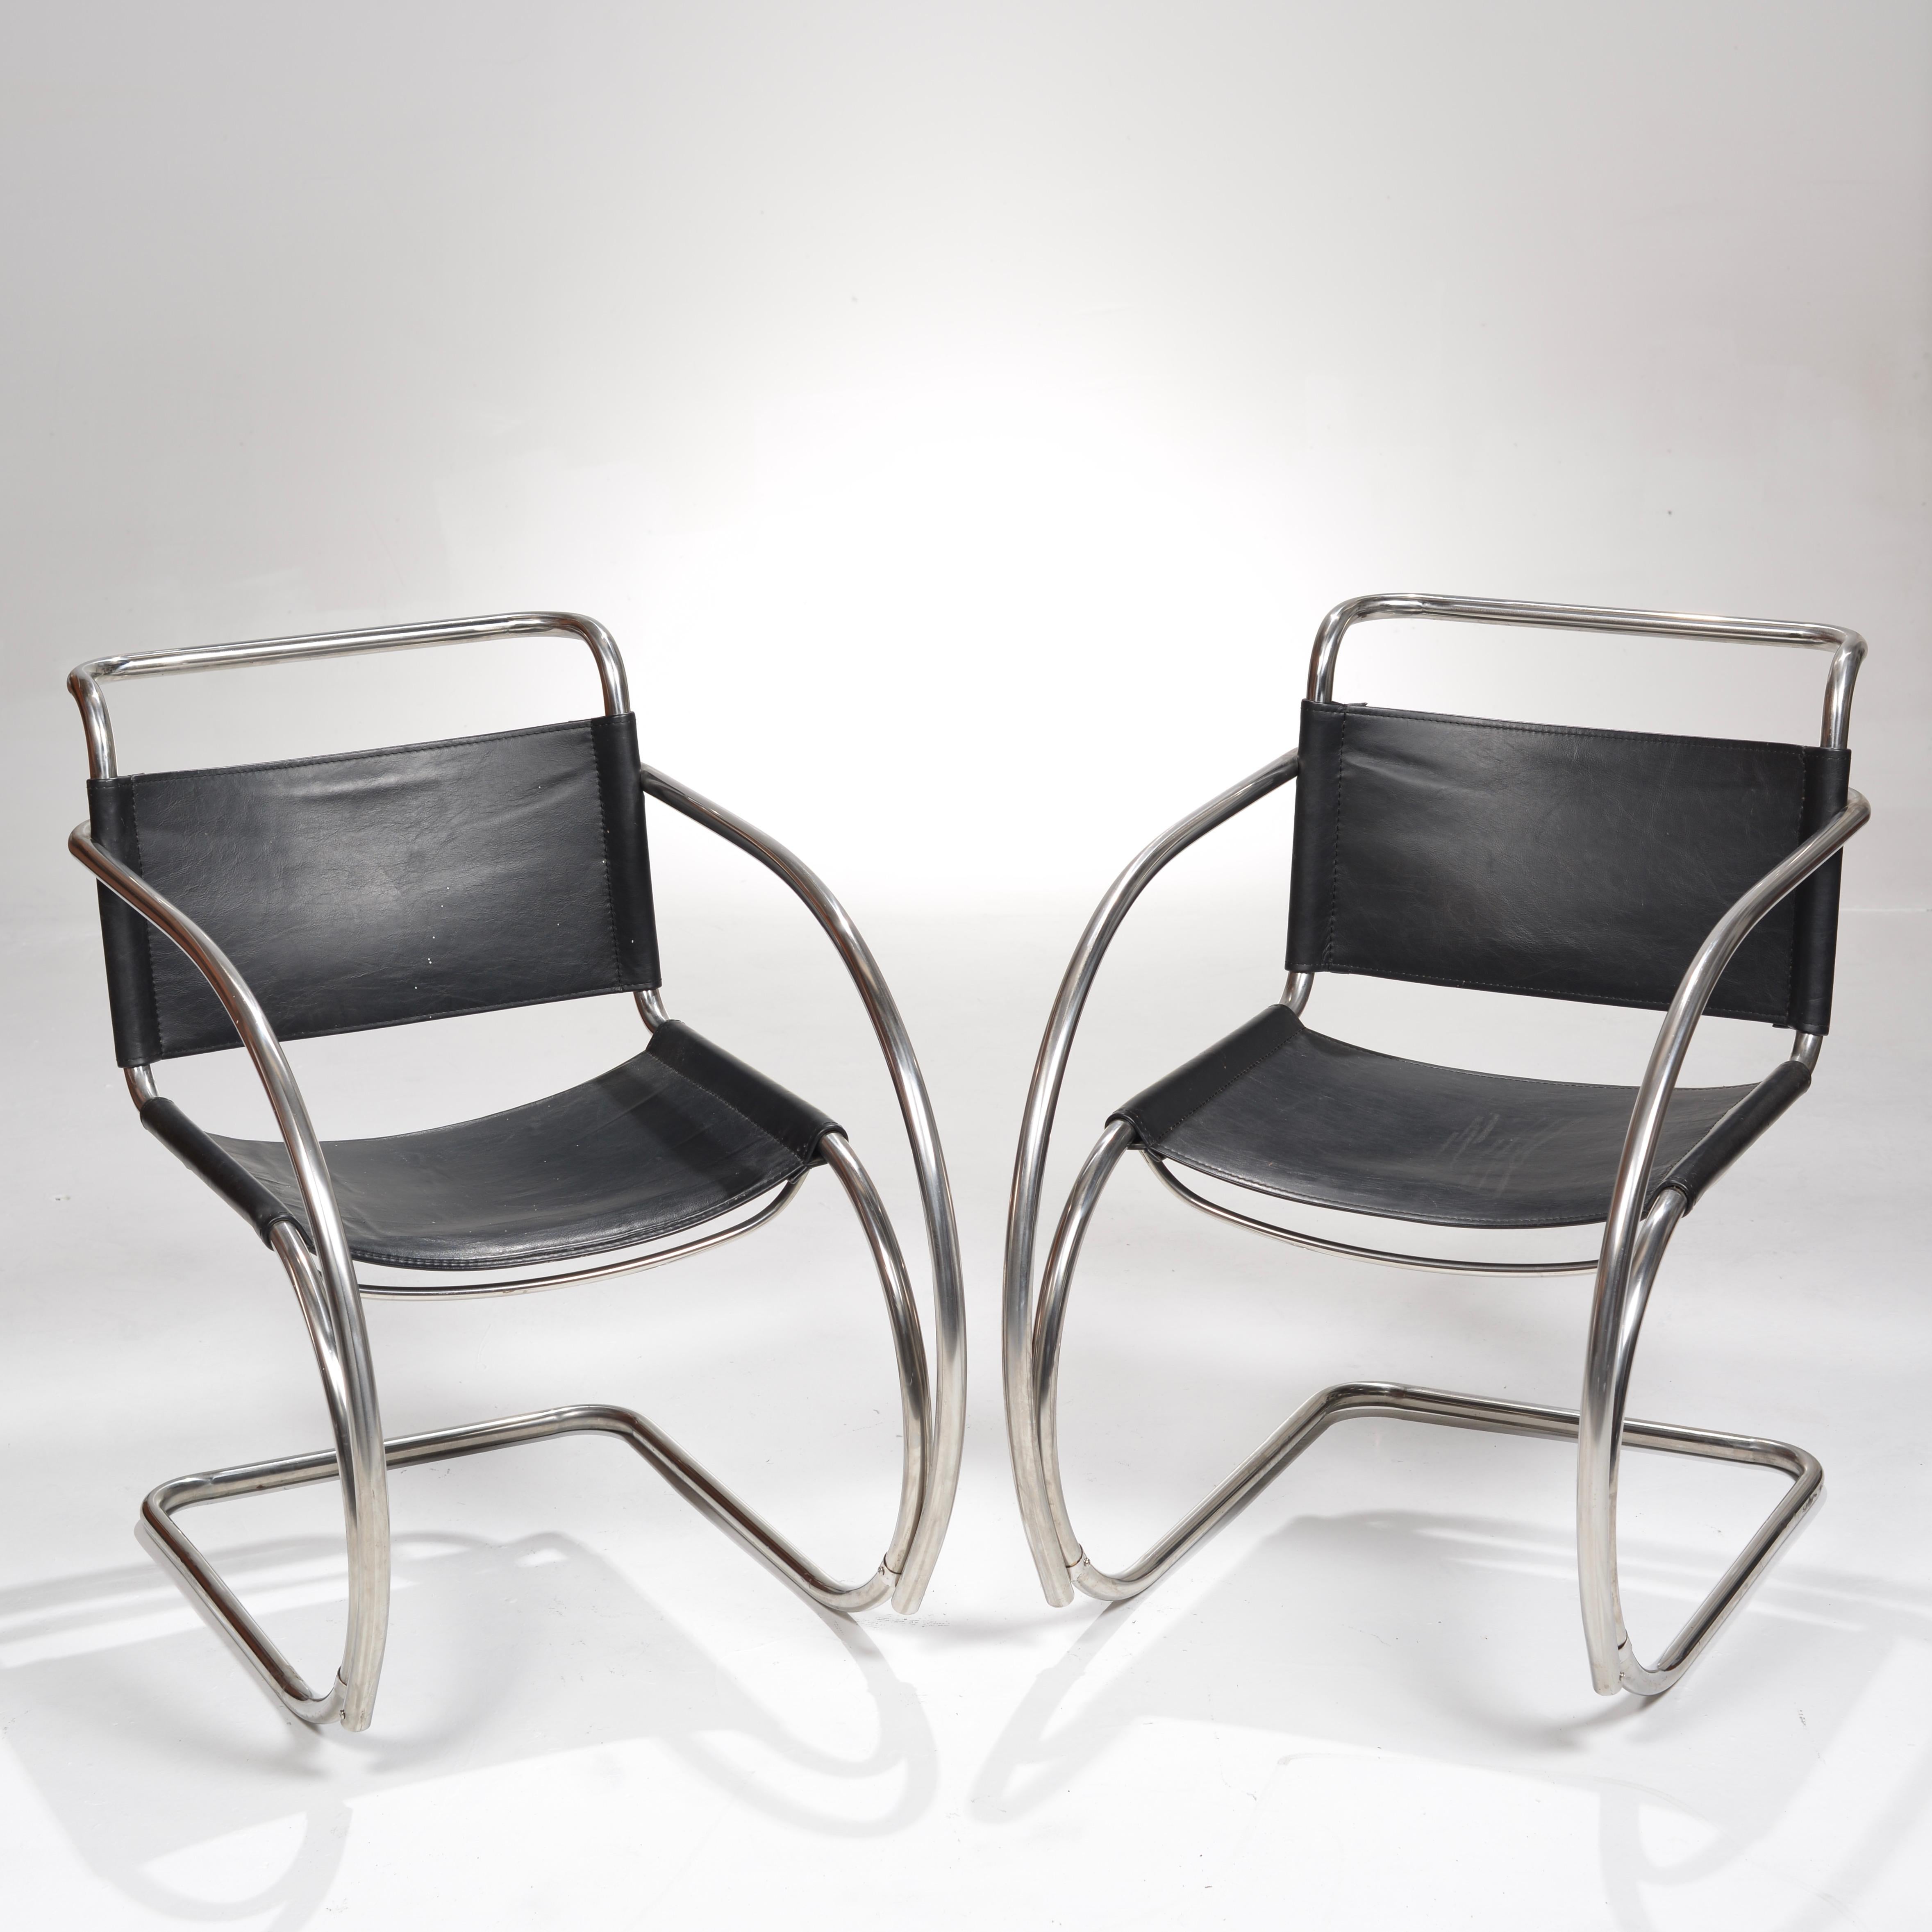 Pair of MR20 armchairs designed by Mies van der Rohe for Knoll.